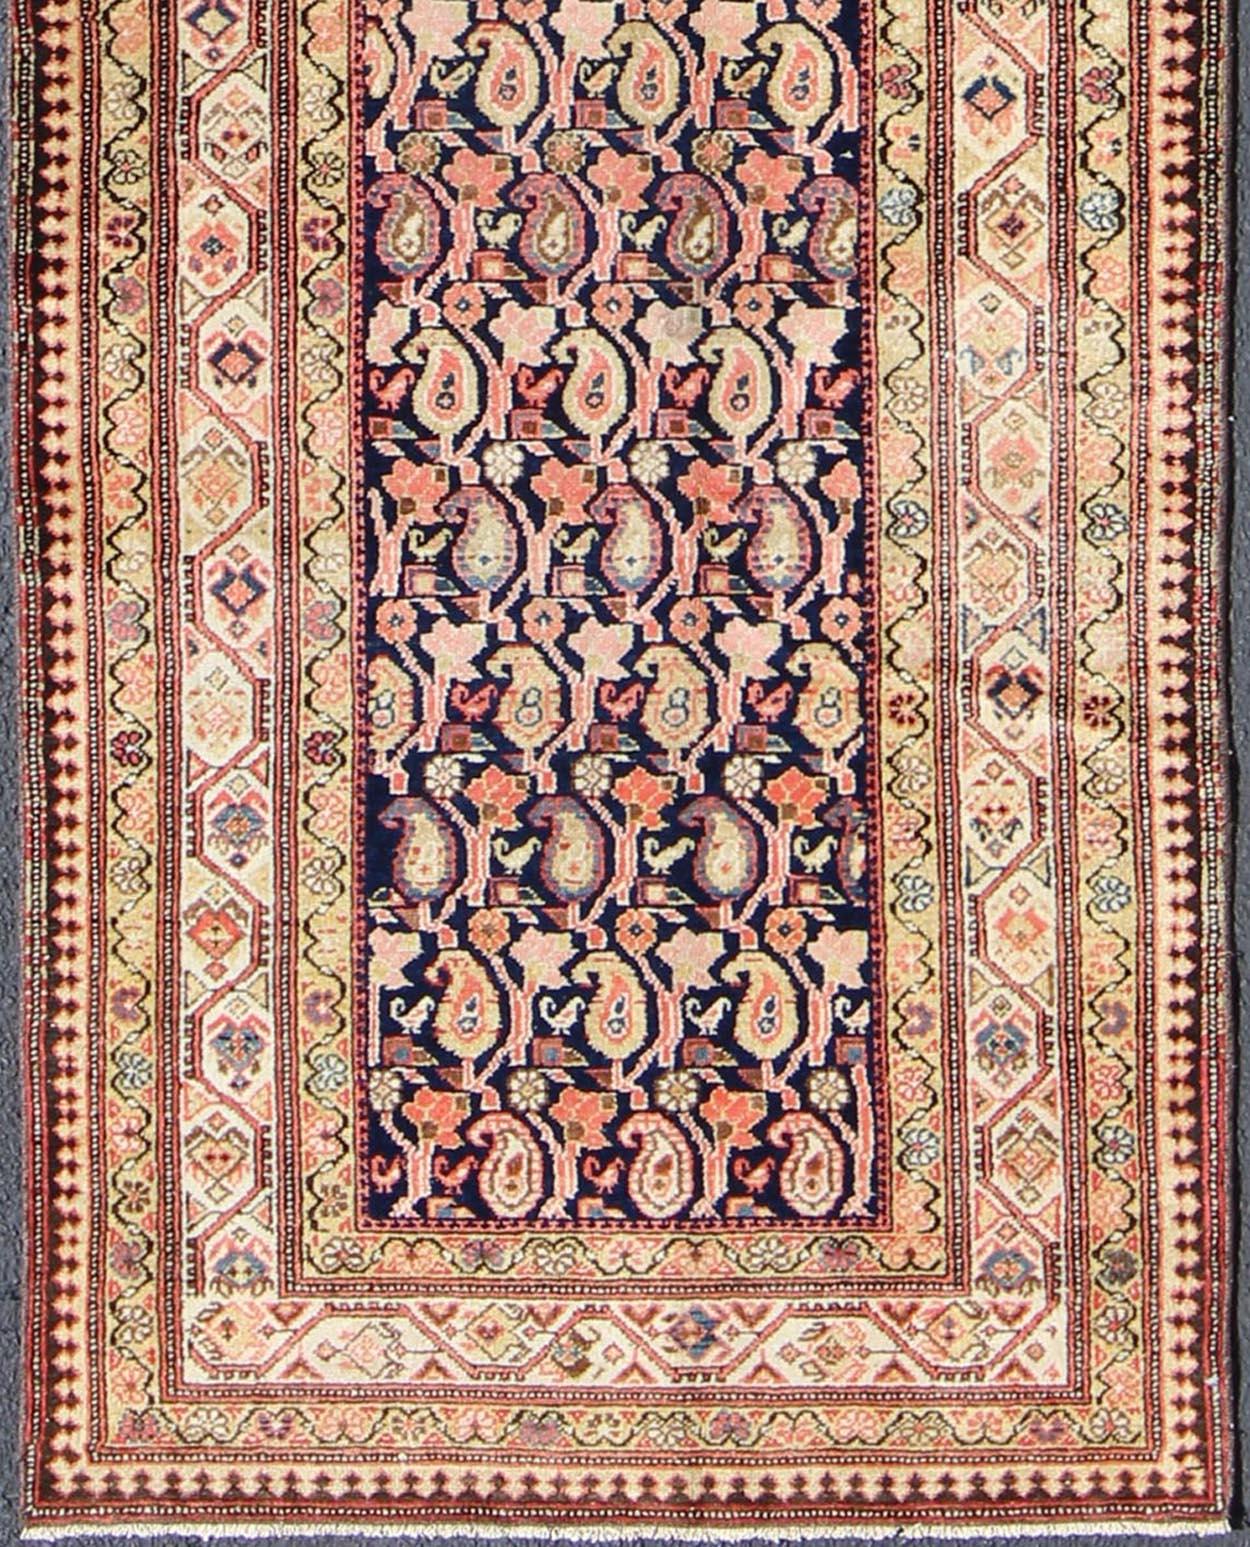 Onyx, Nude, and Peach Malayer runner antique from Persia with all-over paisley motifs, rug ema-7519, country of origin / type: Iran / Malayer, circa 1910

This antique Persian Malayer runner, circa early 20th century, relies heavily on exquisite